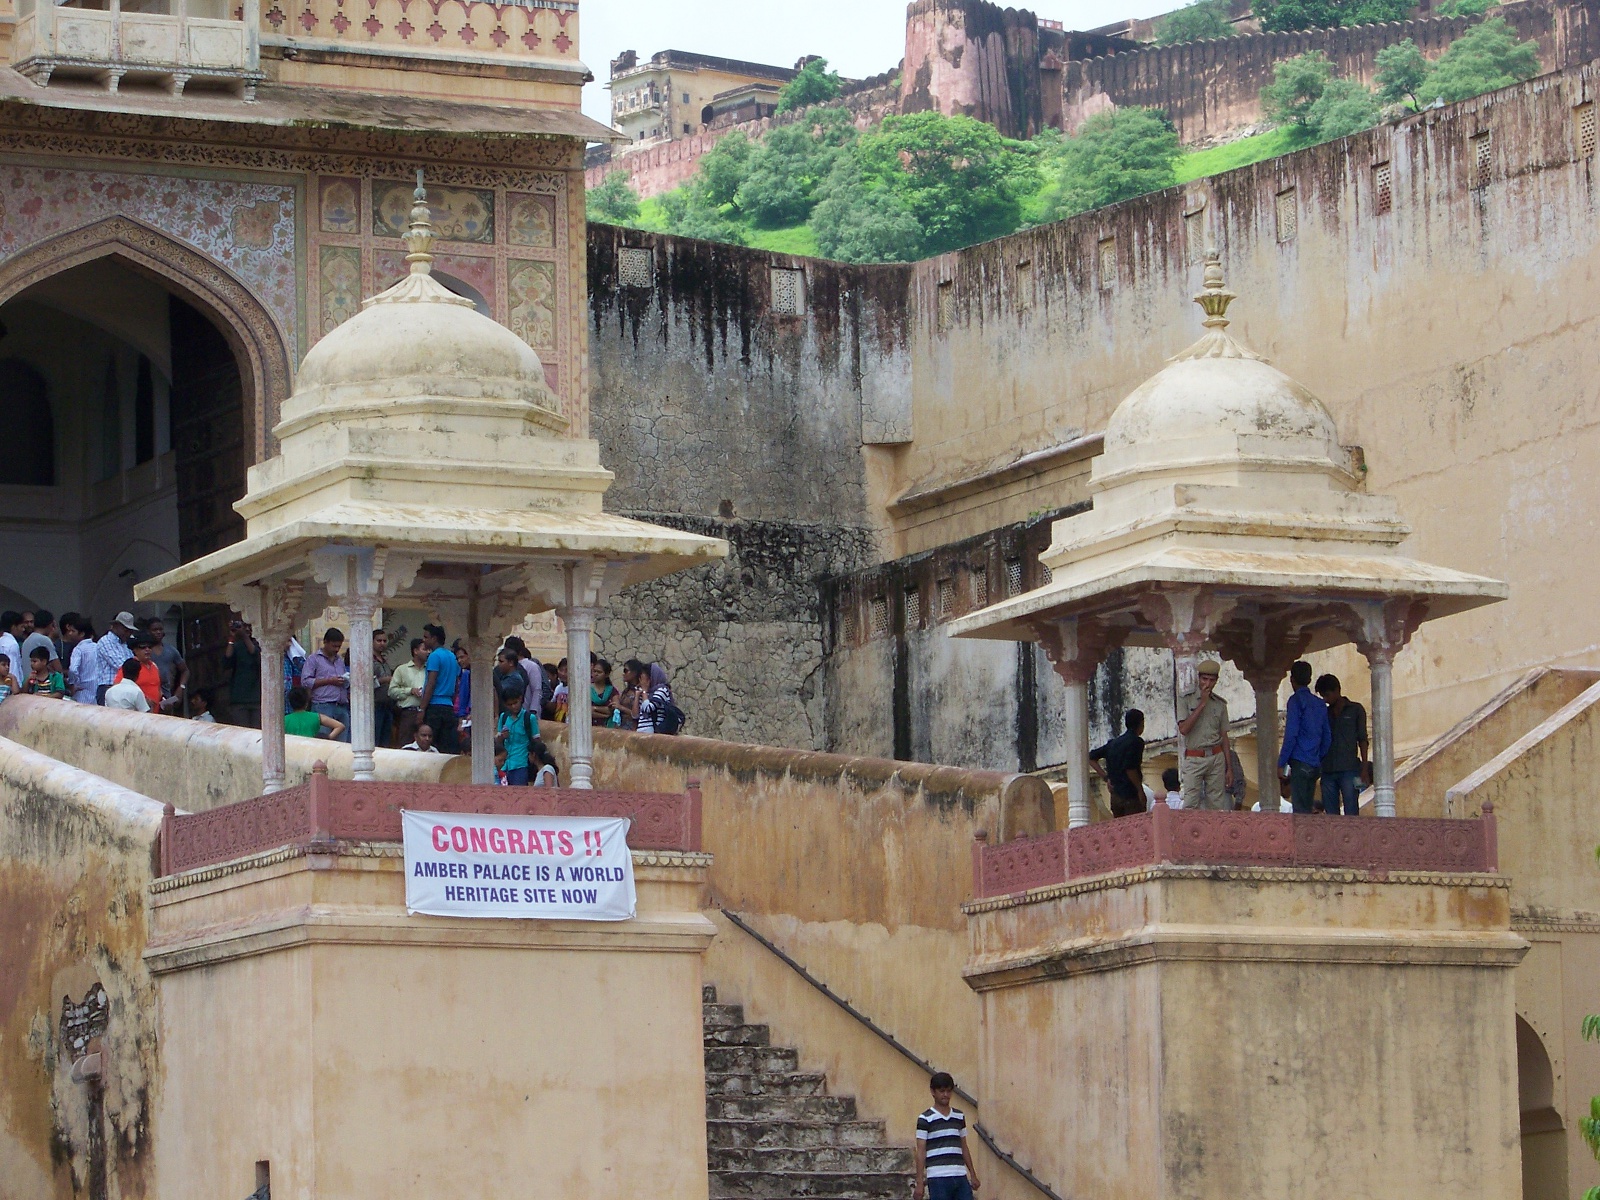 Amber Fort celebrates its designation as a World Heritage Site, July 2013.